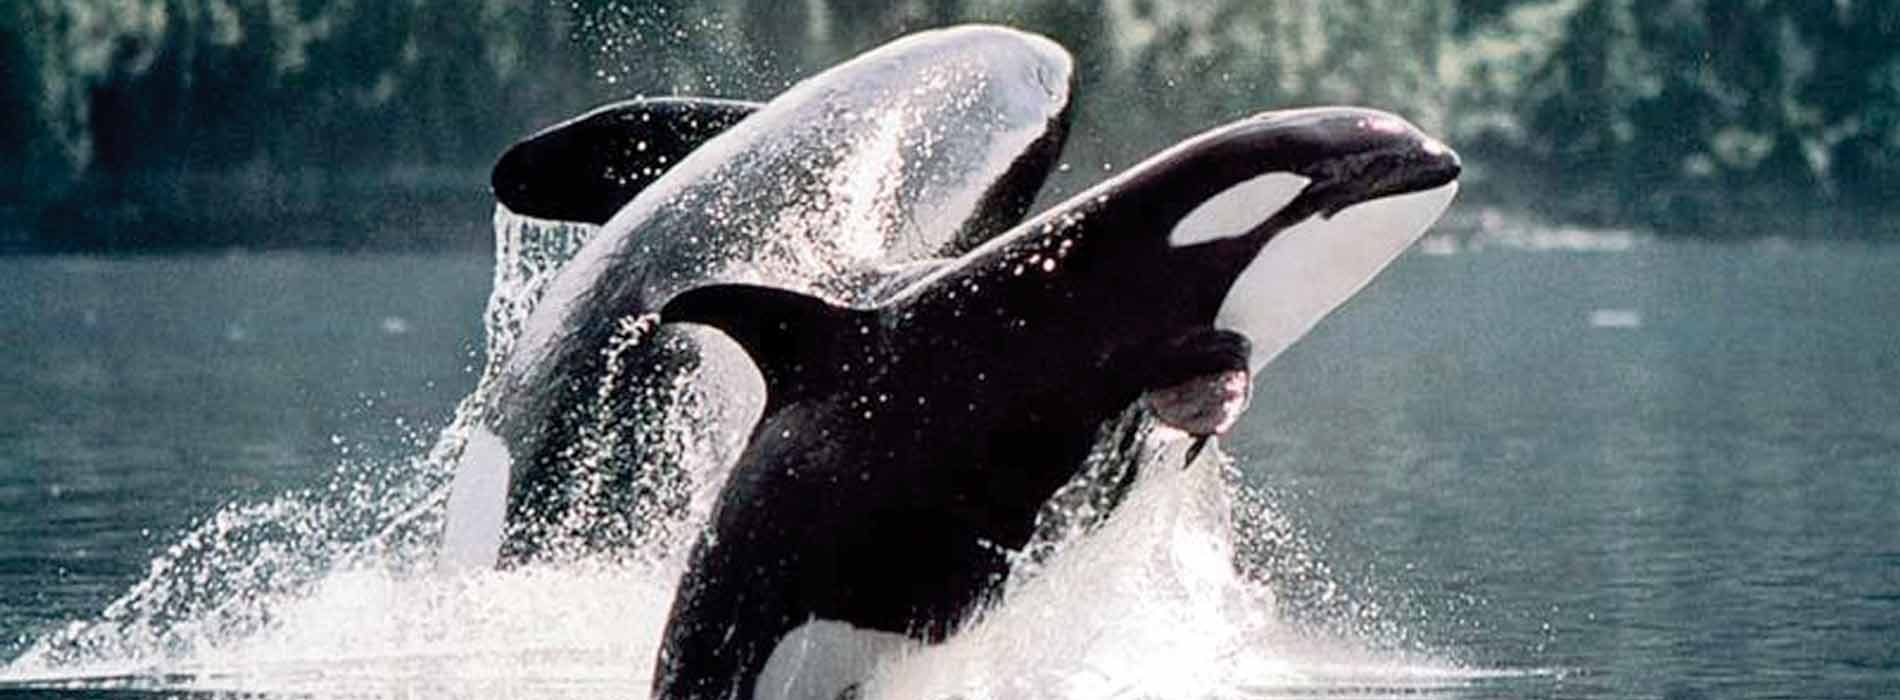 Two killer whales jumping